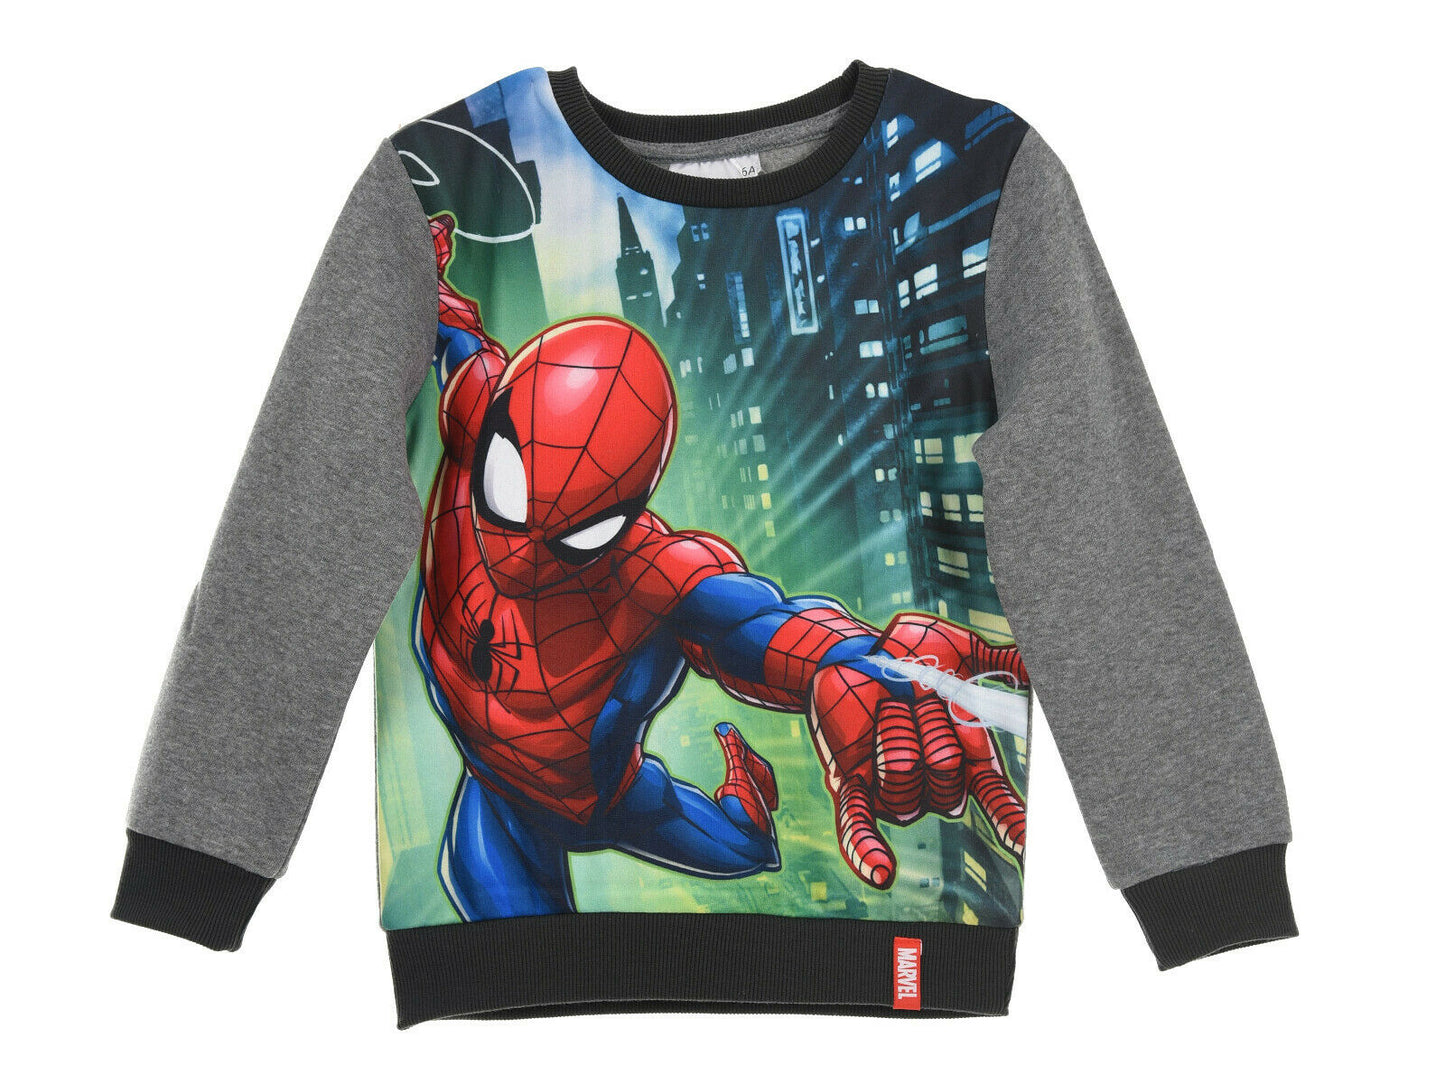 Spiderman Sweat shirt, Perfect For Any Spiderman Lover, Grey Design, Ages 3 & 8 65% Polyester & 35% Cotton Official Merchandise